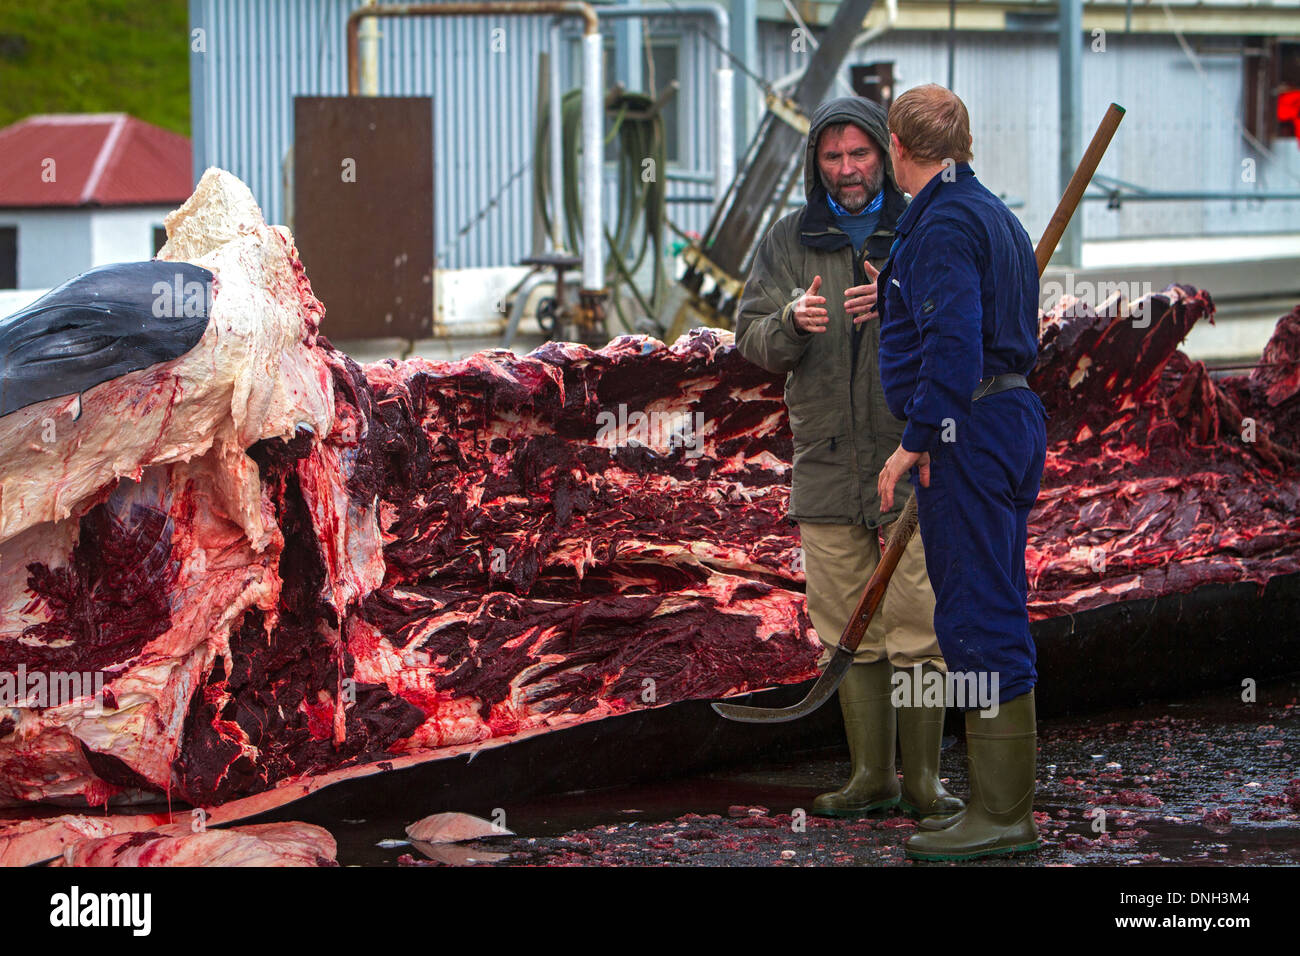 PORTRAIT OF KRISTJAN LOFTSSON, PROPRIETOR OF THE WHALING COMPANY HVALUR DURING THE CUTTING UP OF A FINBACK WHALE AT THE SEASIDE RESORT OF HVALFJORDUR, THE FJORD OF WHALES, WHALE HUNTING IN ICELAND, WESTERN ICELAND, EUROPE Stock Photo